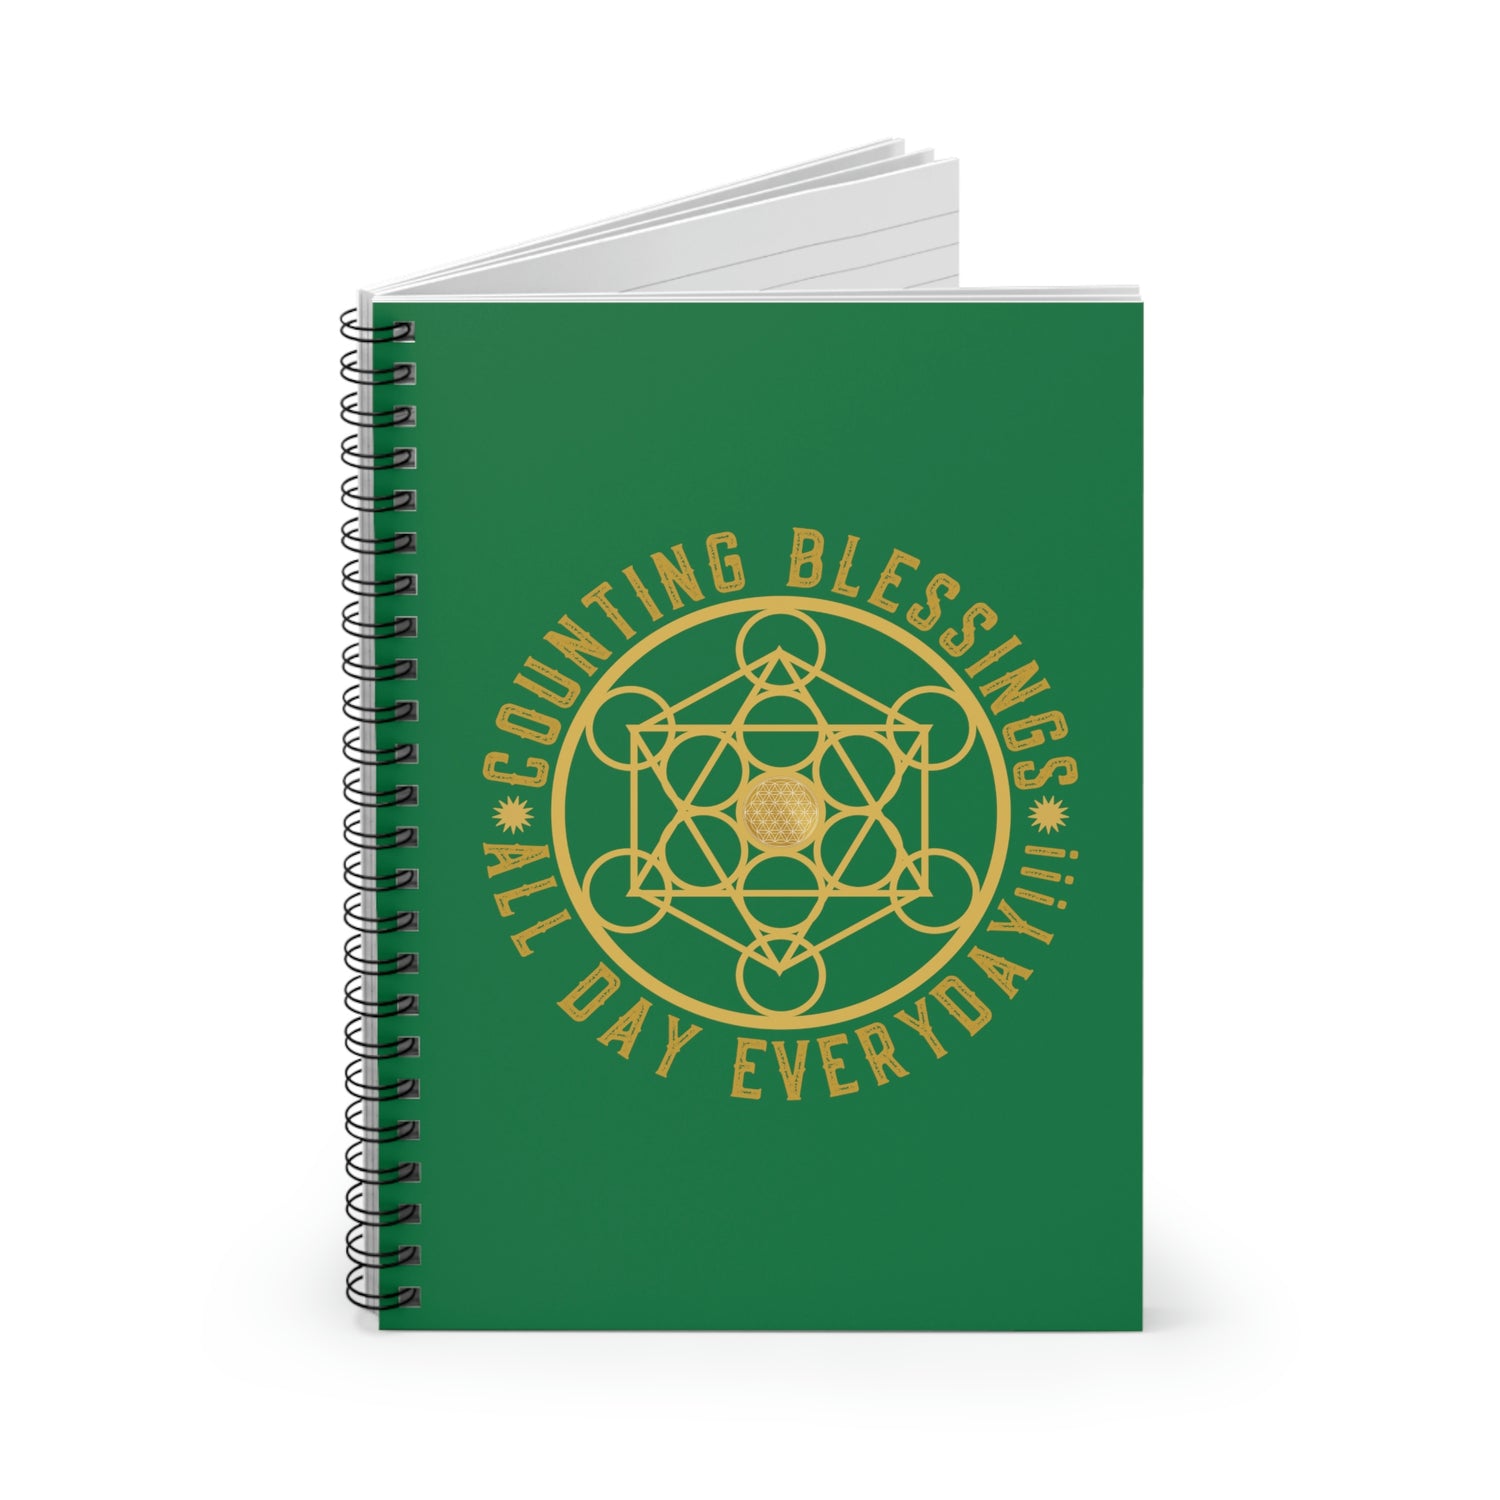 COUNTING BLESSINGS ALL DAY EVERYDAY!!! - Spiral Notebook - Ruled Line - Green